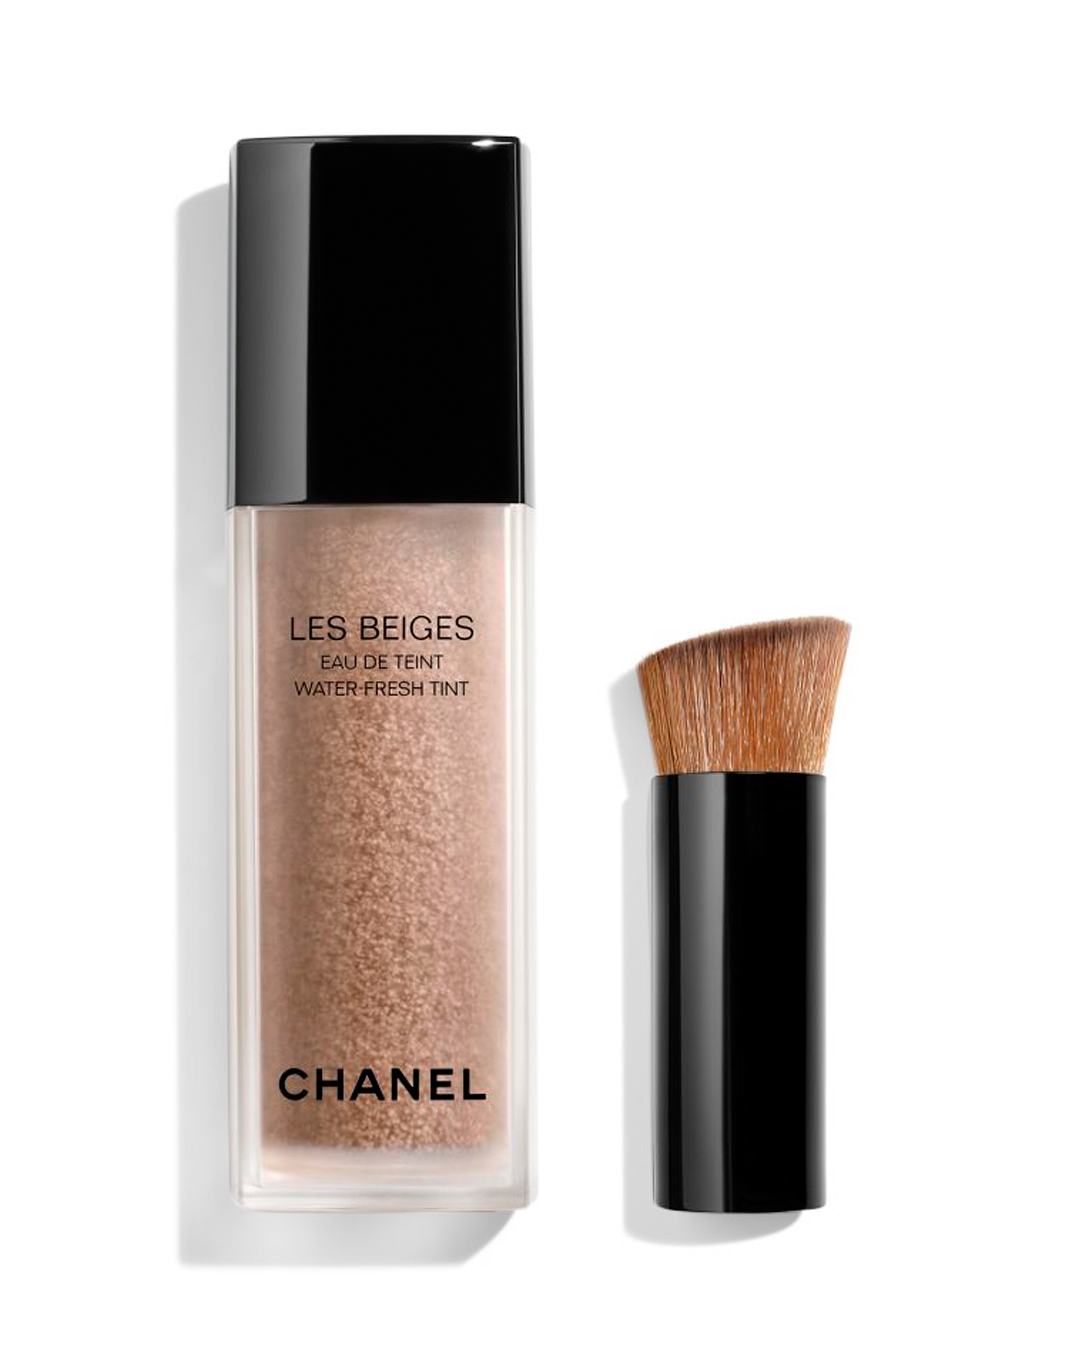 CHANEL LES BEIGES WATER-FRESH TINT 